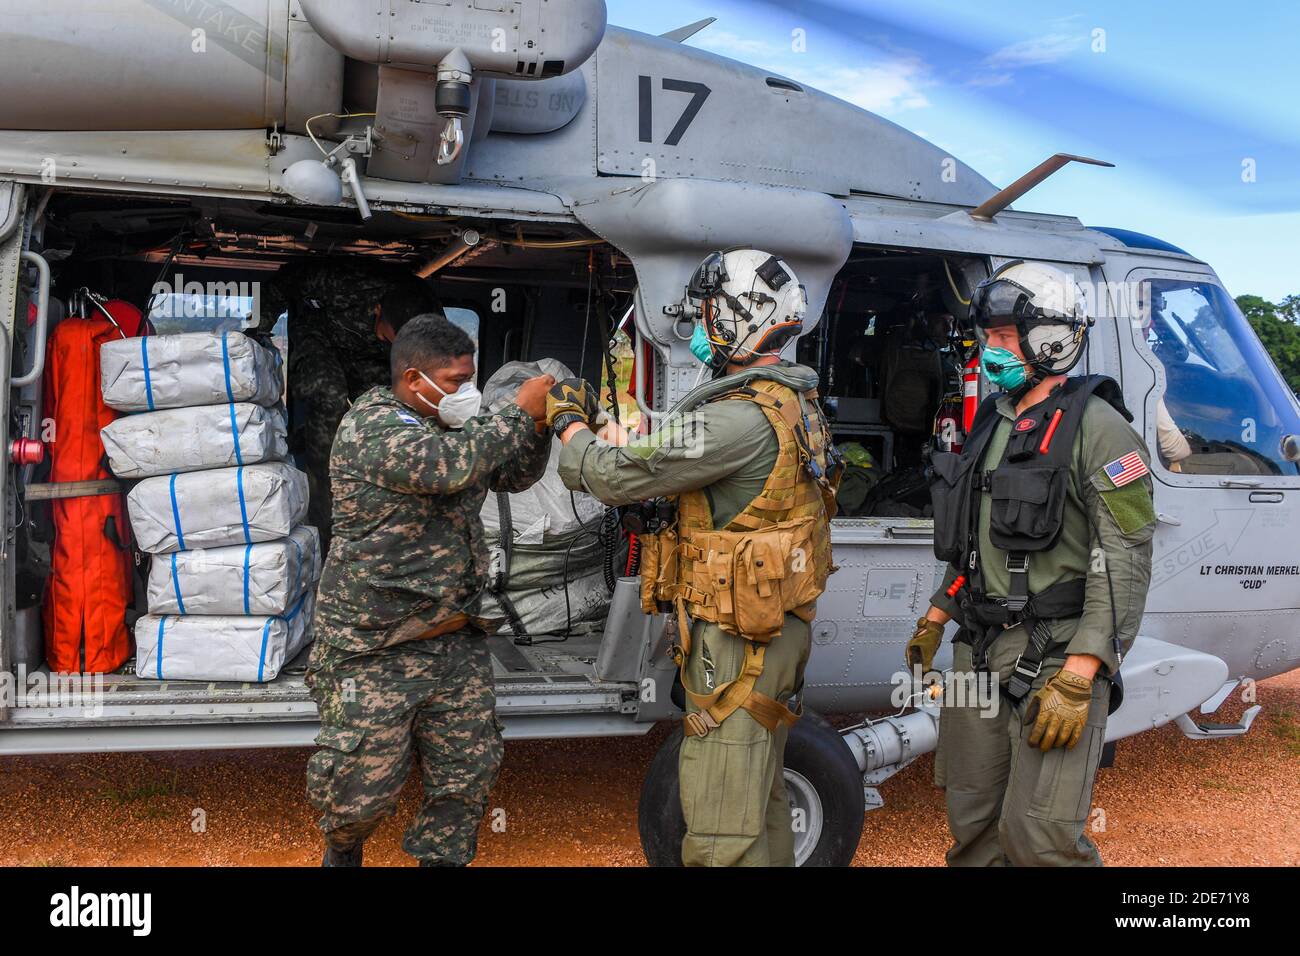 Soto Cano, Honduras. 27th Nov, 2020. U.S. Navy pilots unload humanitarian supplies to an awaiting Honduran soldier from a U.S. Navy Sea Hawk helicopter to assist in the aftermath of Hurricane Iota November 27, 2020 in Soto Cano, Honduras. Back to back hurricanes Eta and Iota swept through Central America destroying large sections of the coast and flooding roads. Credit: MCS Juel Foster/US Navy/Alamy Live News Stock Photo